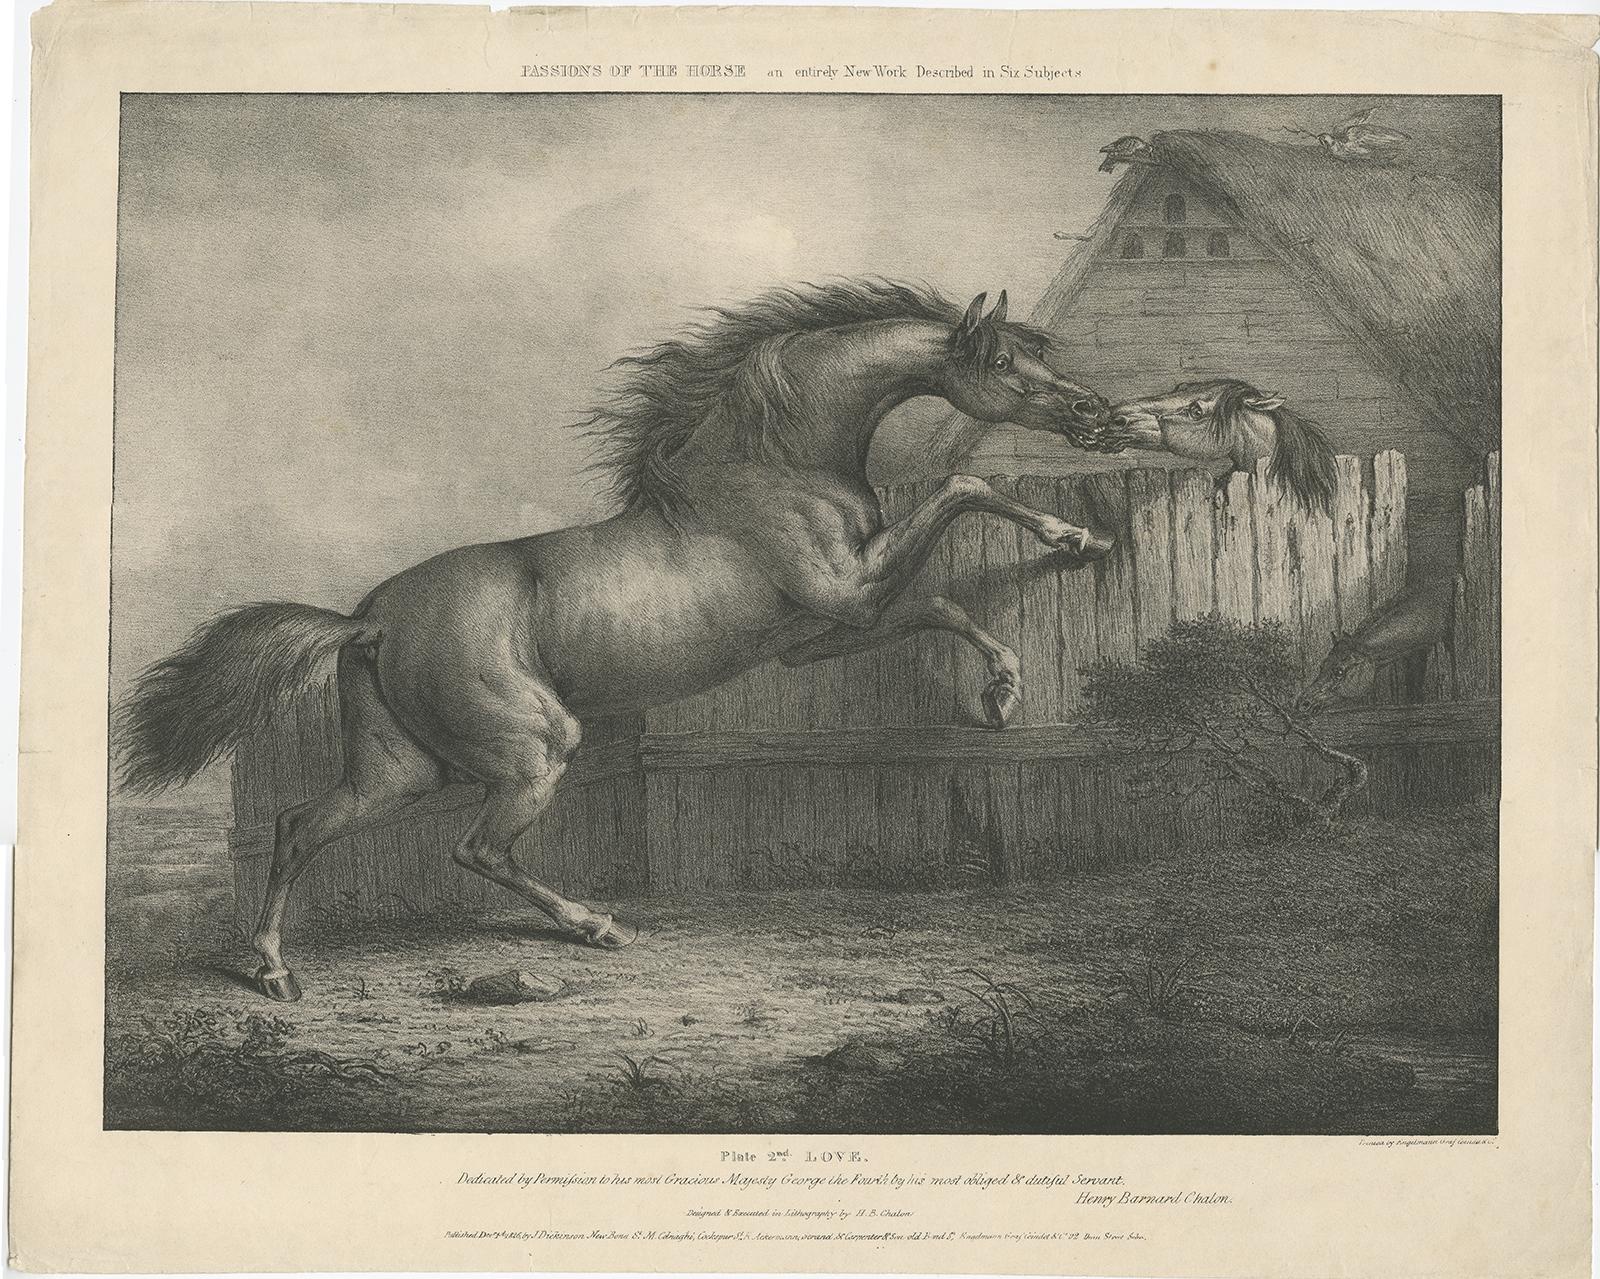 Antique horse print titled 'Plate 2nd Love, dedicated by permission to his most Gracious Majesty George the Fourth (..)'. 

Artists and Engravers: In 1827, British artist Henry Barnard Chalon (1770-1849), designed and lithographed a portfolio of six